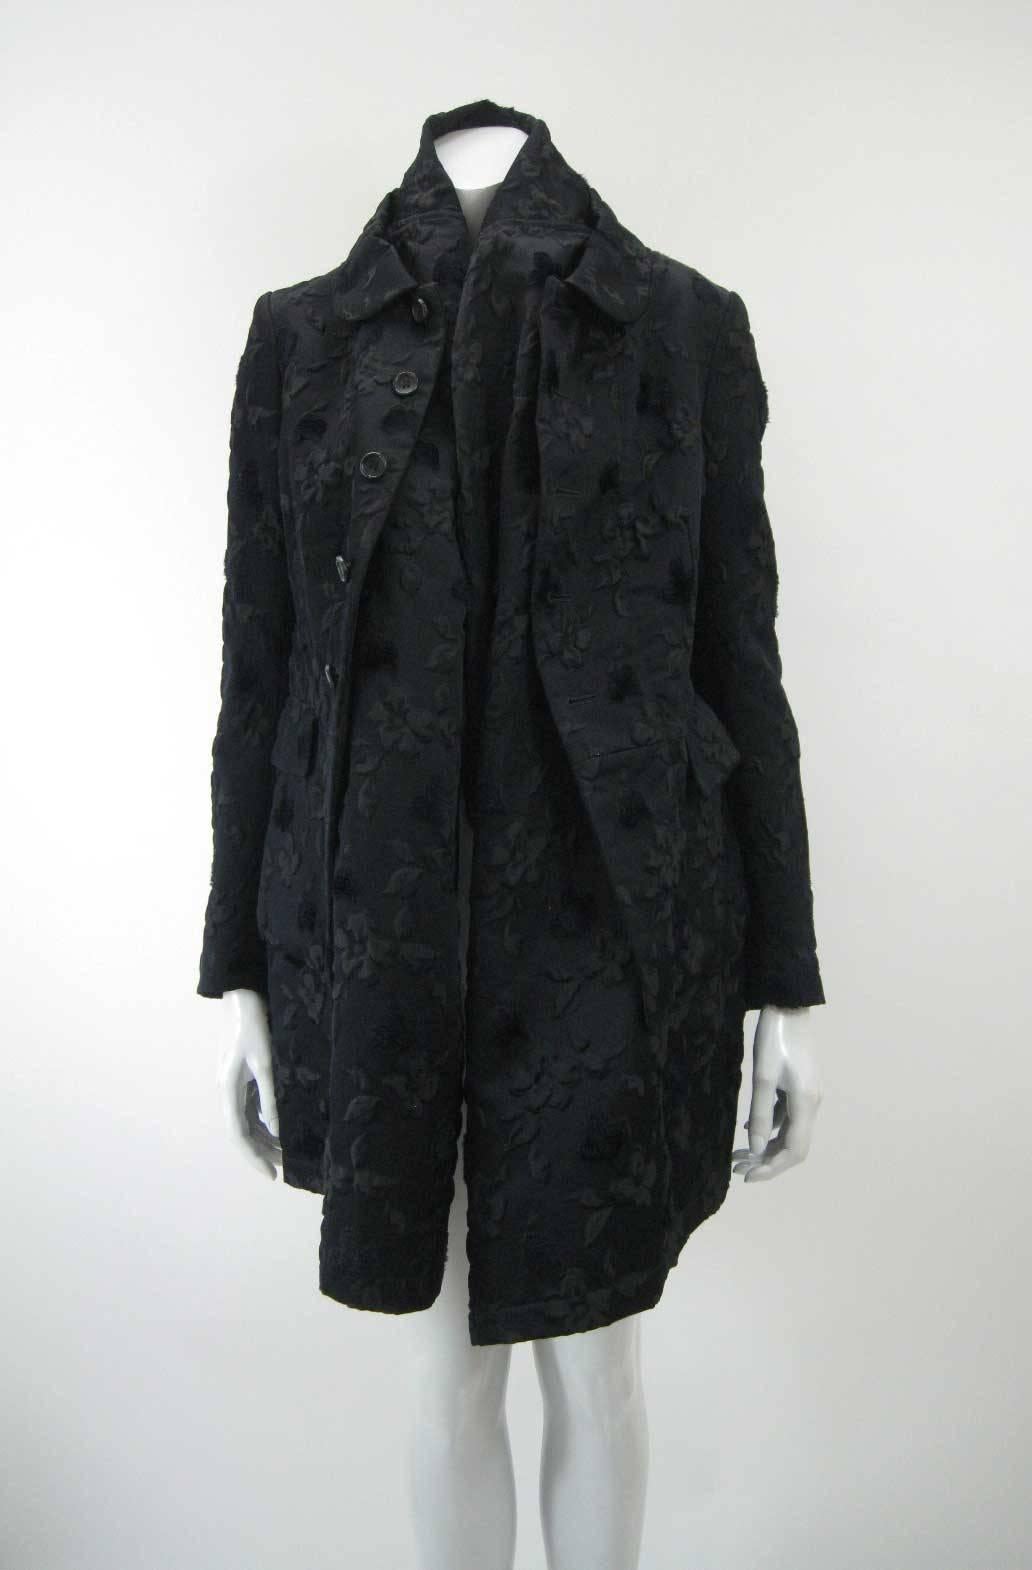 Avant garde Comme des Garcons black brocade coat.

The coat features an exaggerated partially attached lining tucks in and creates an added layer around neck and head and down body.

Outer rounded fold over peter pan style collar.

Five button